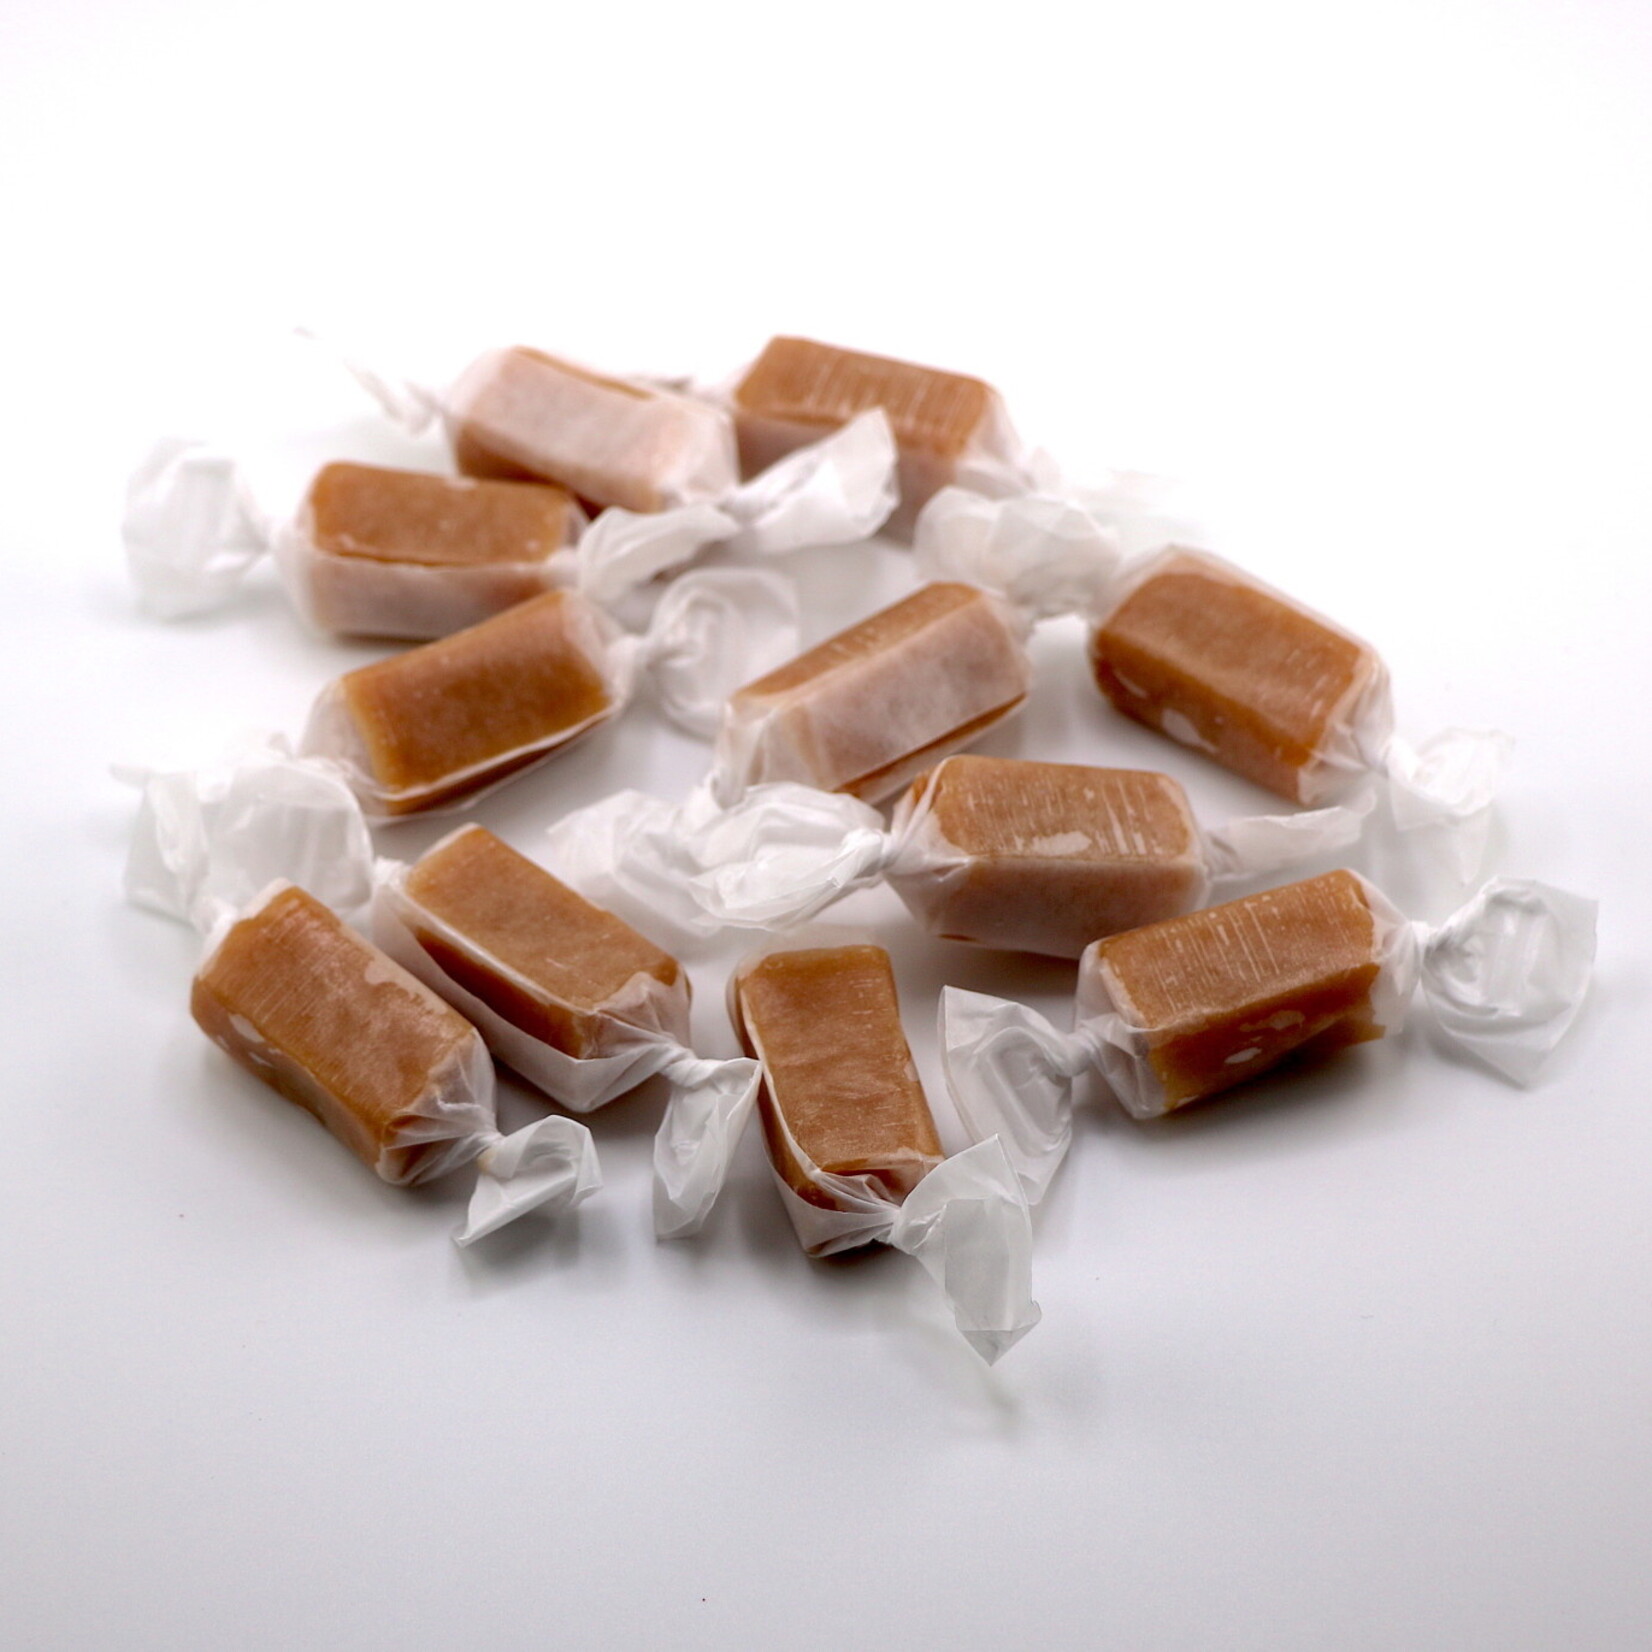 The Huckleberry People Garden of the Gods Prickly Pear Caramels - 5 oz.